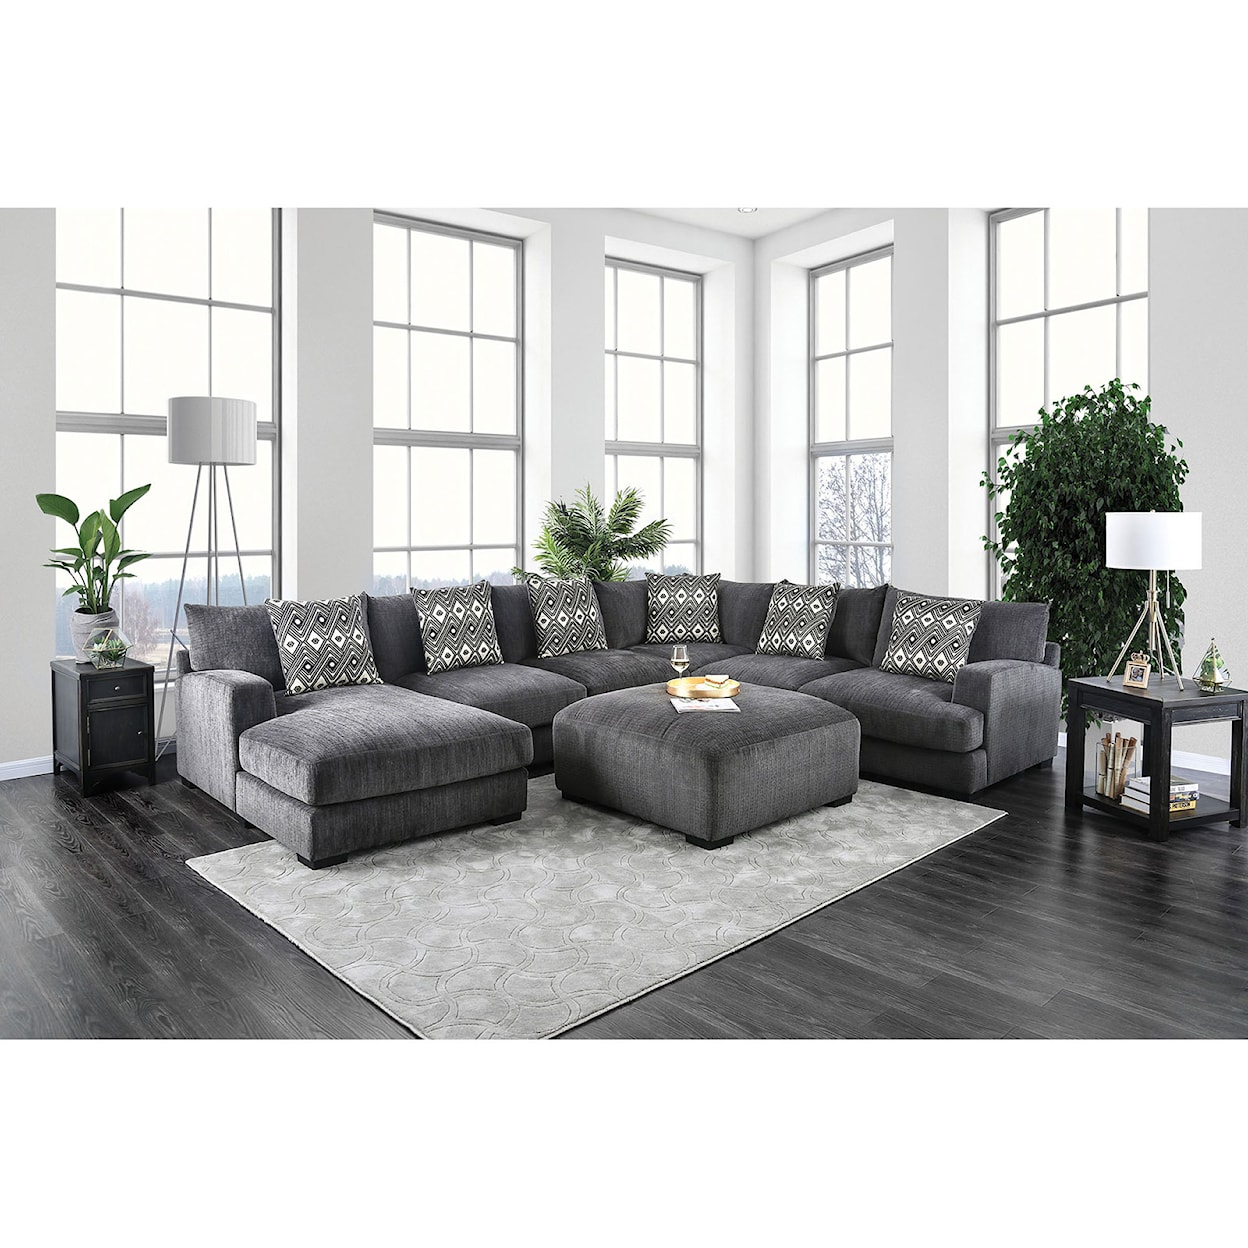 Furniture of America Kaylee U-Shaped Sectional with Ottoman